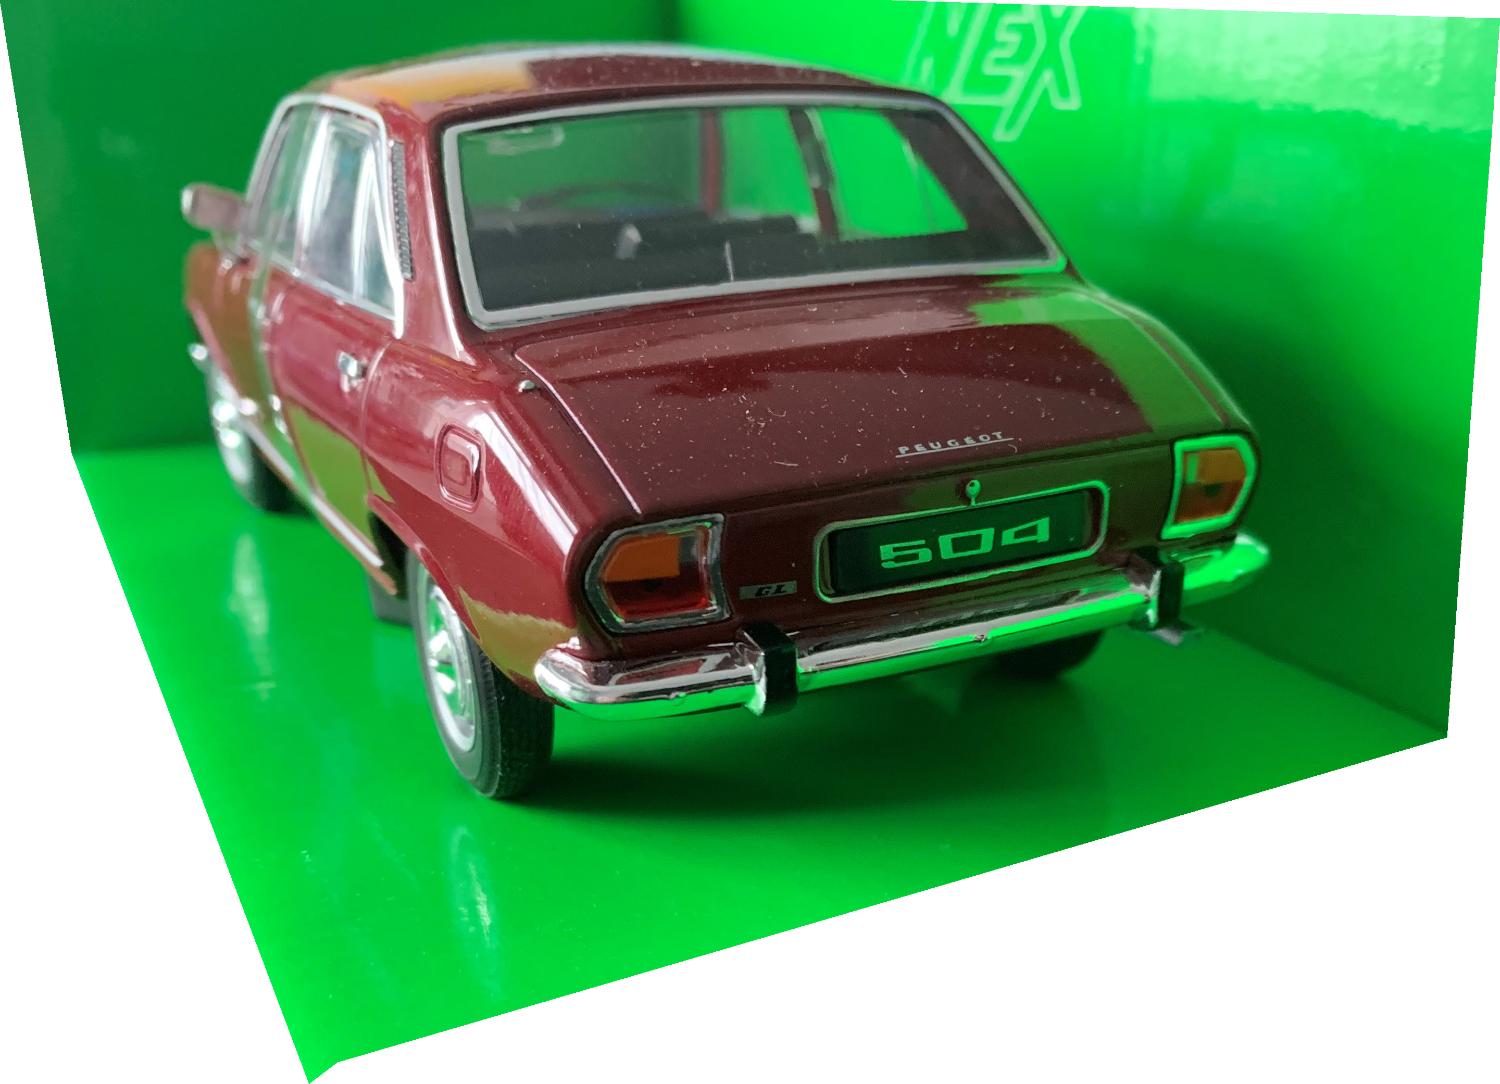 Peugeot 504 1975 in maroon 1:24 scale model from Welly